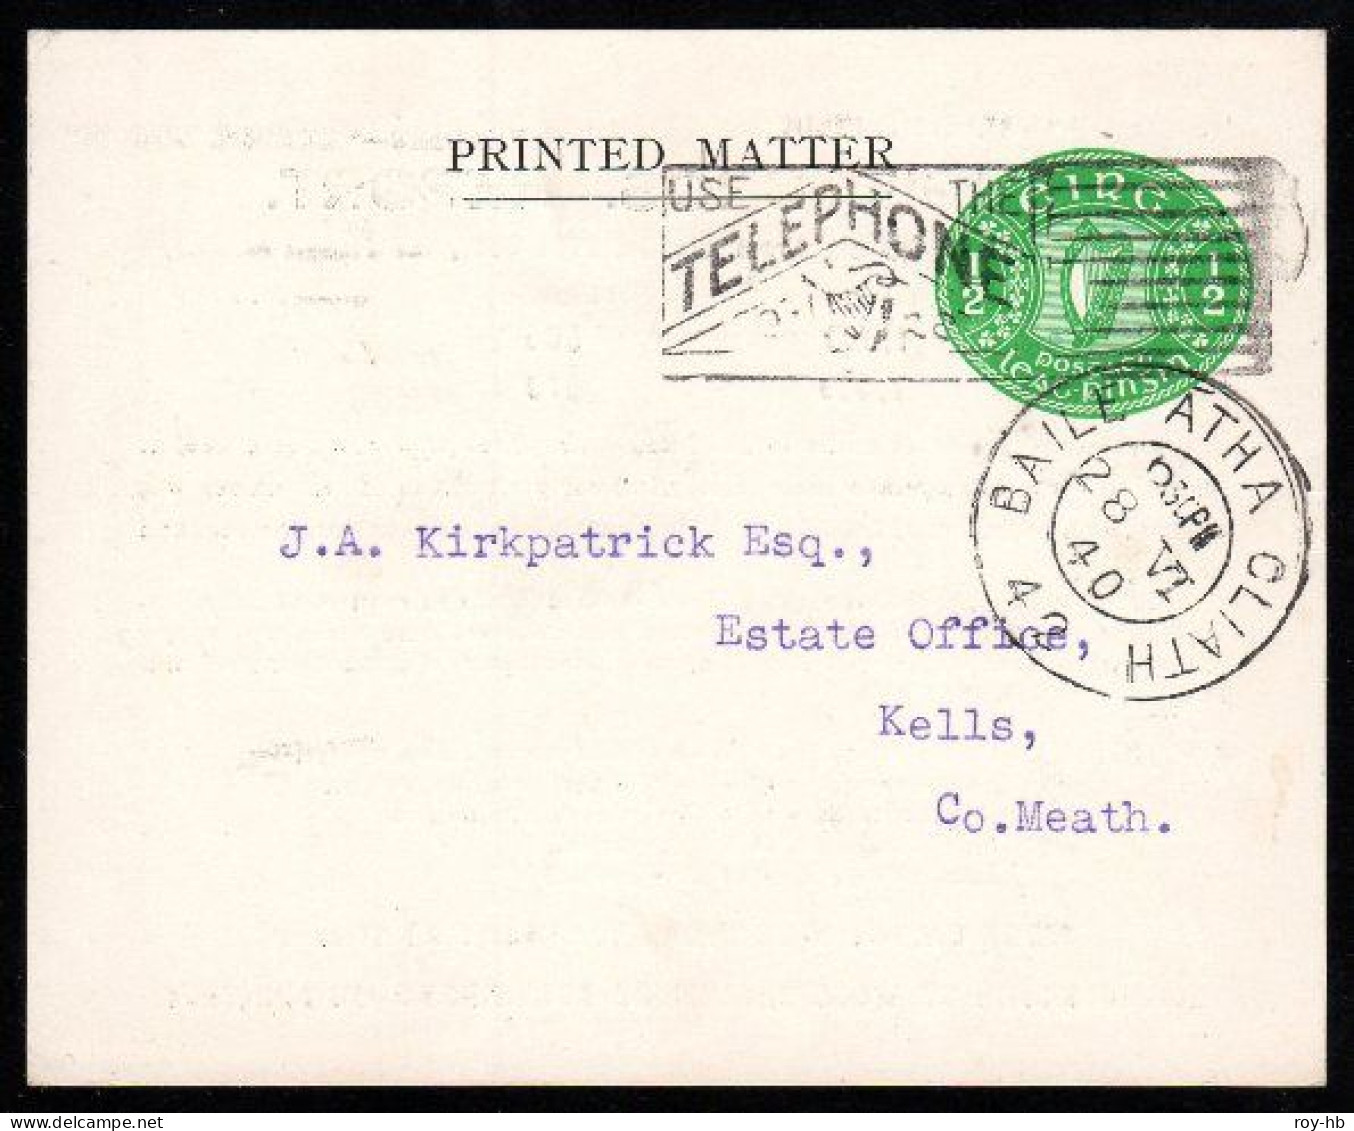 Stamped To Order Craigie Bros. 1940 ½d Post Card Very Fine Used From Dublin To Kells, Very Clean, No Filing Hole. - Entiers Postaux